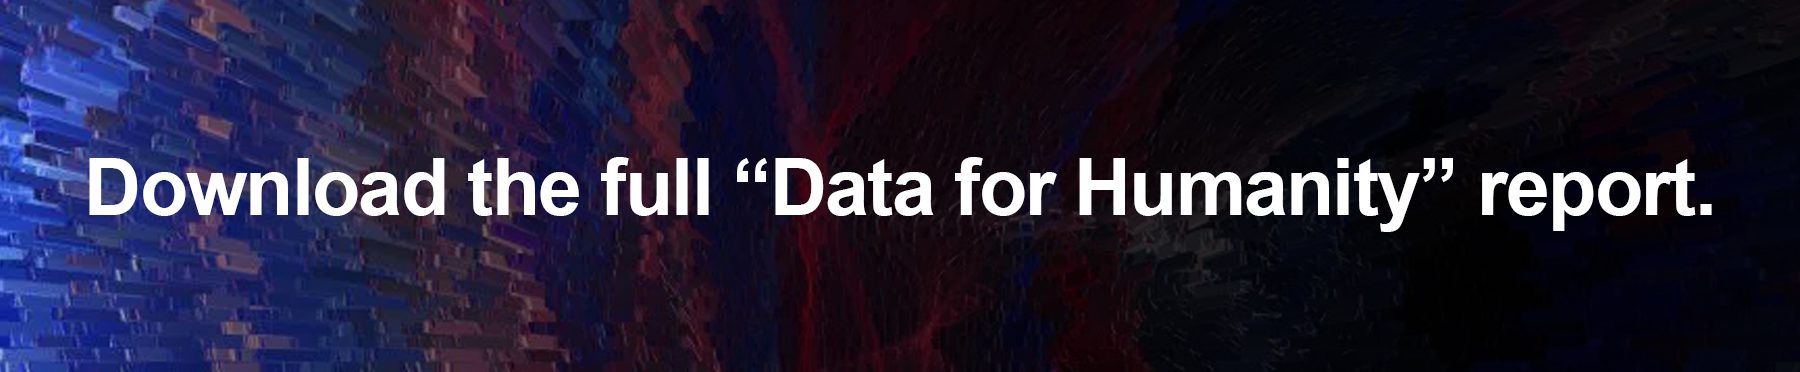 Text on graphic: Download the full "Data for Humanity" report.